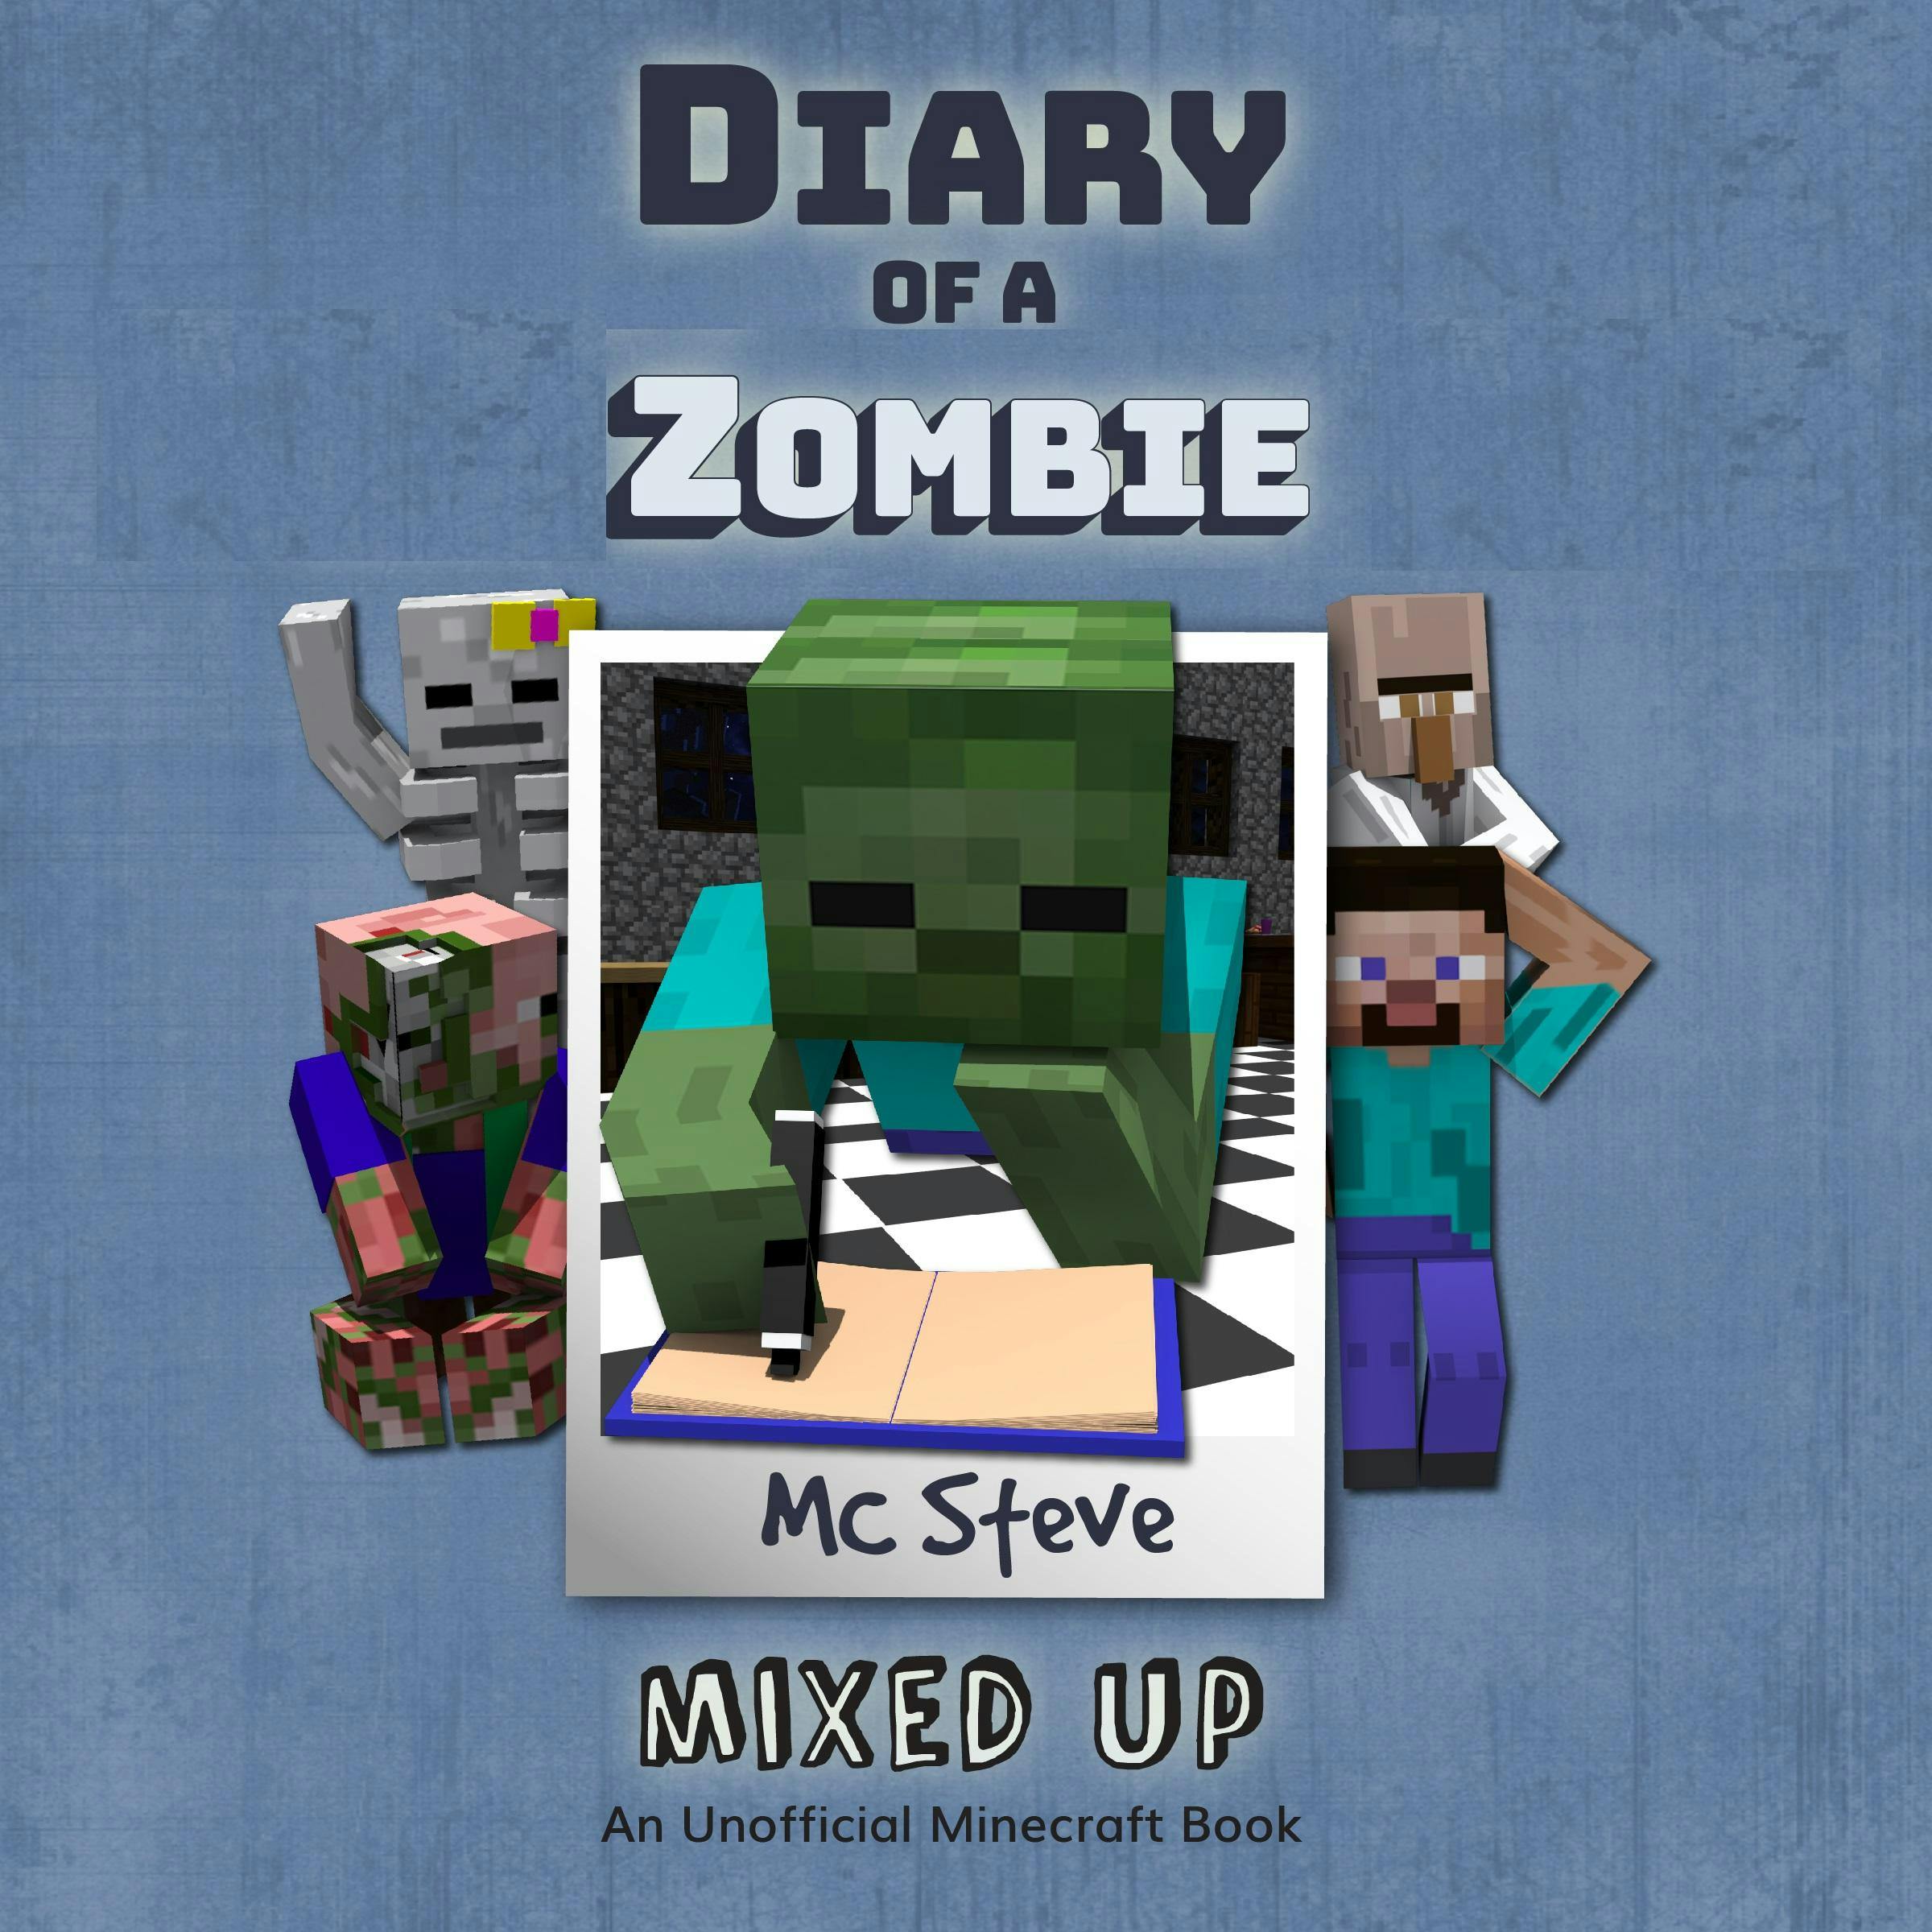 Diary Of A Zombie Book 5 - Mixed Up: An Unofficial Minecraft Book - MC Steve